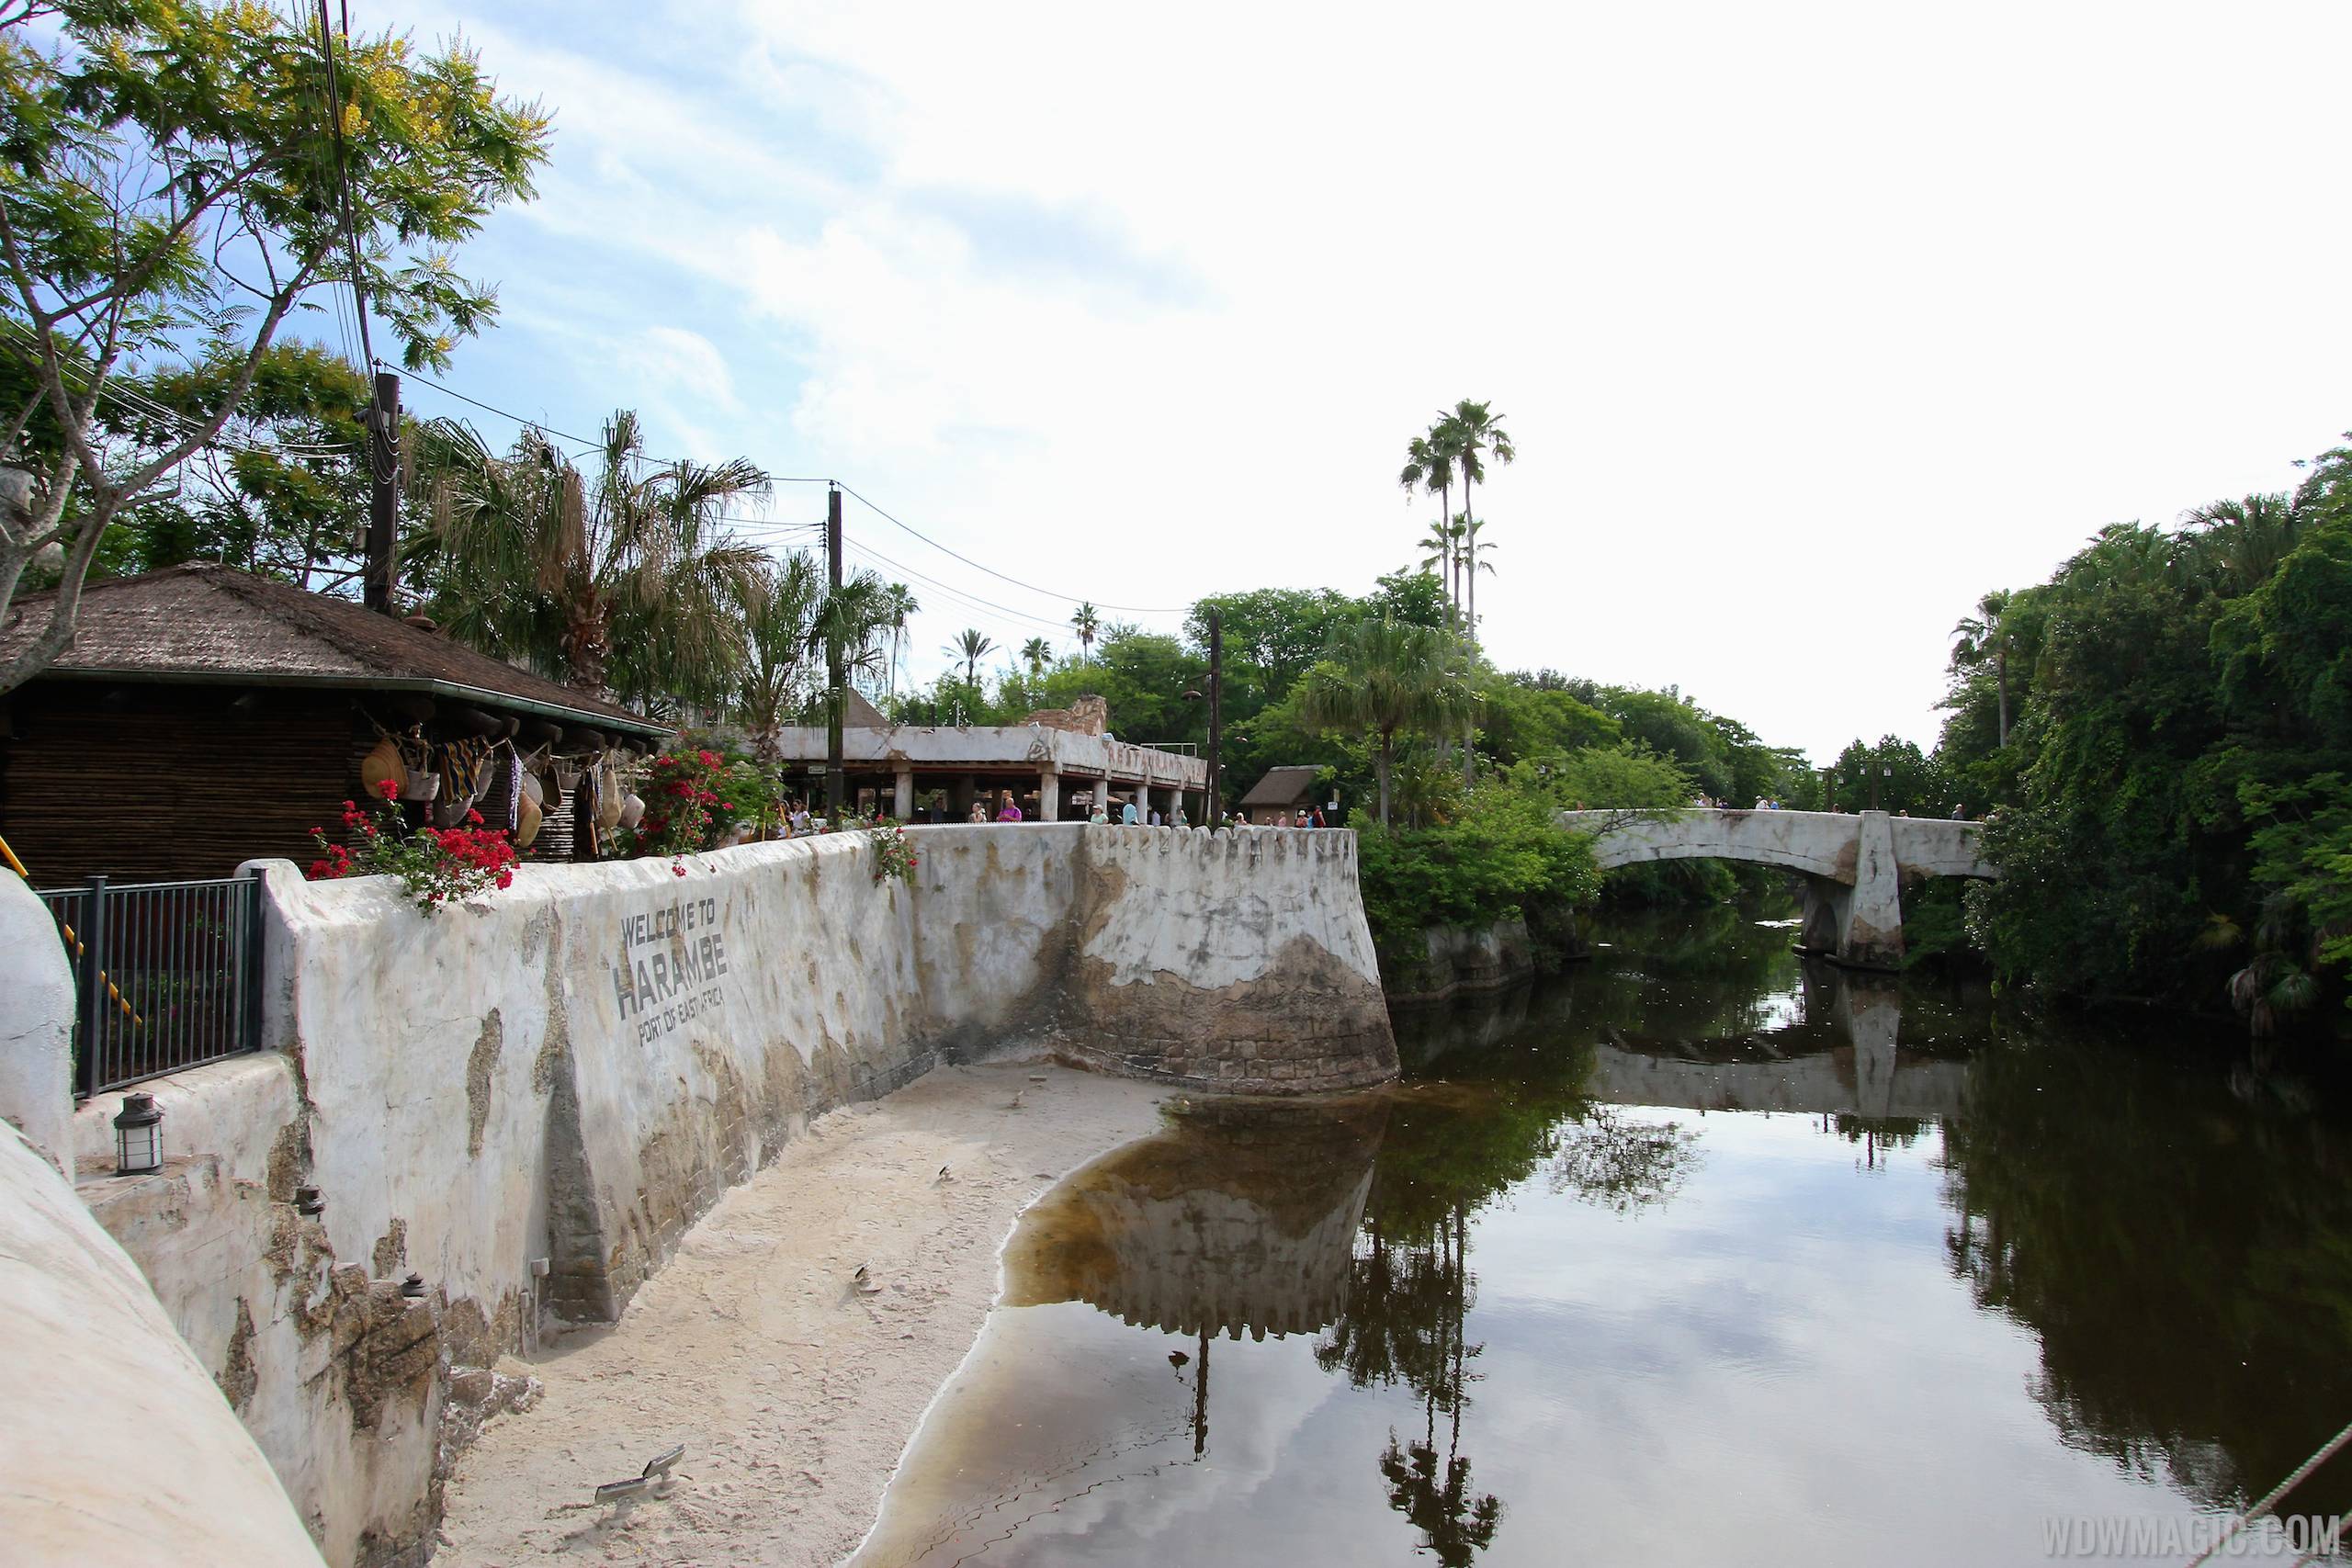 New Harambe Theatre area in Africa - View from the overlook back towards Discovery Island